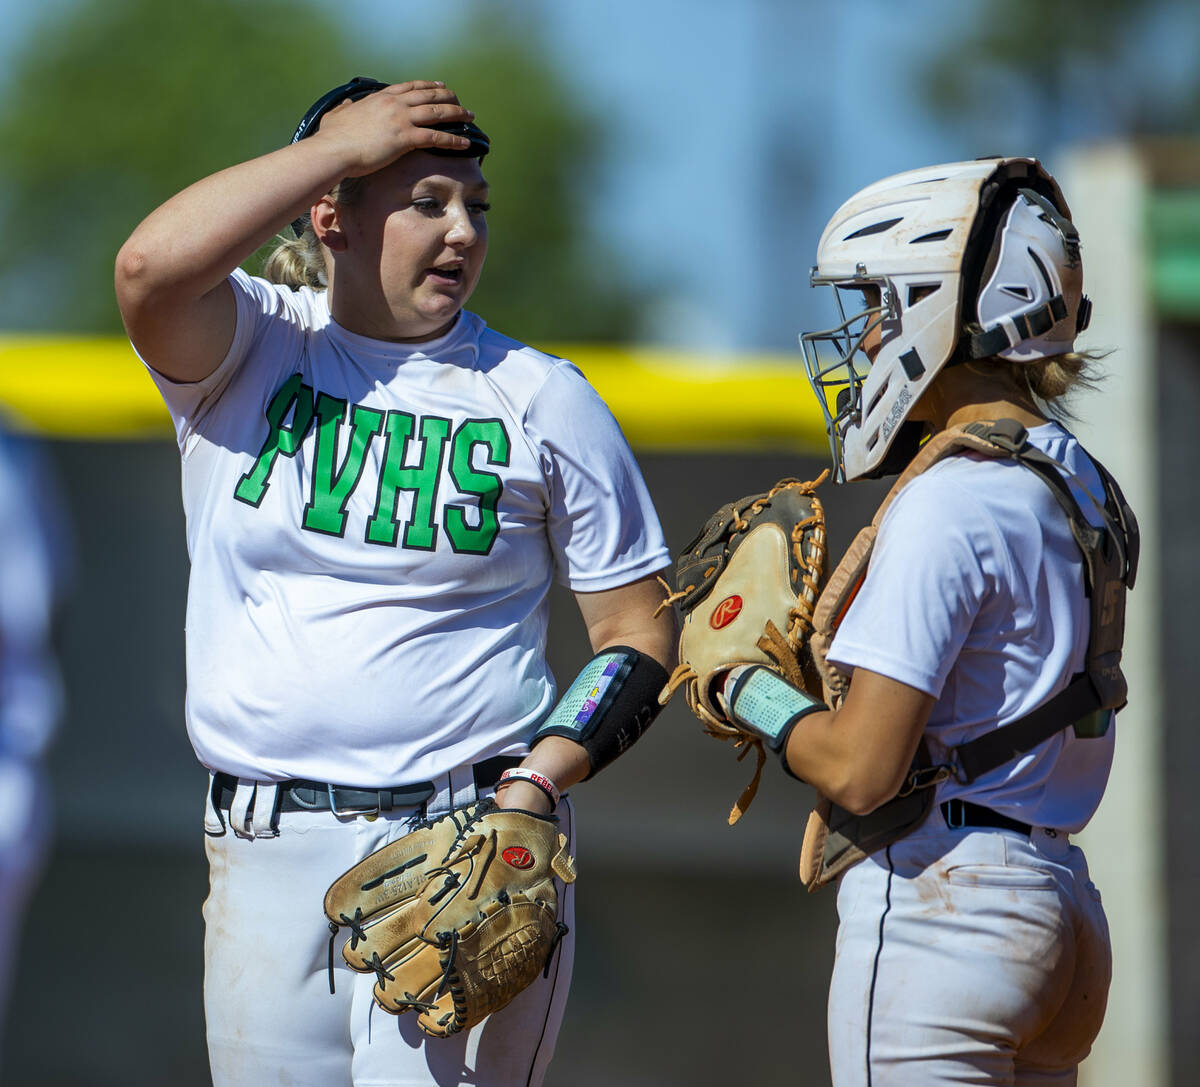 Palo Verde pitcher Bradi Odom (13) confers with catcher Madi Malloy while facing Centennial bat ...